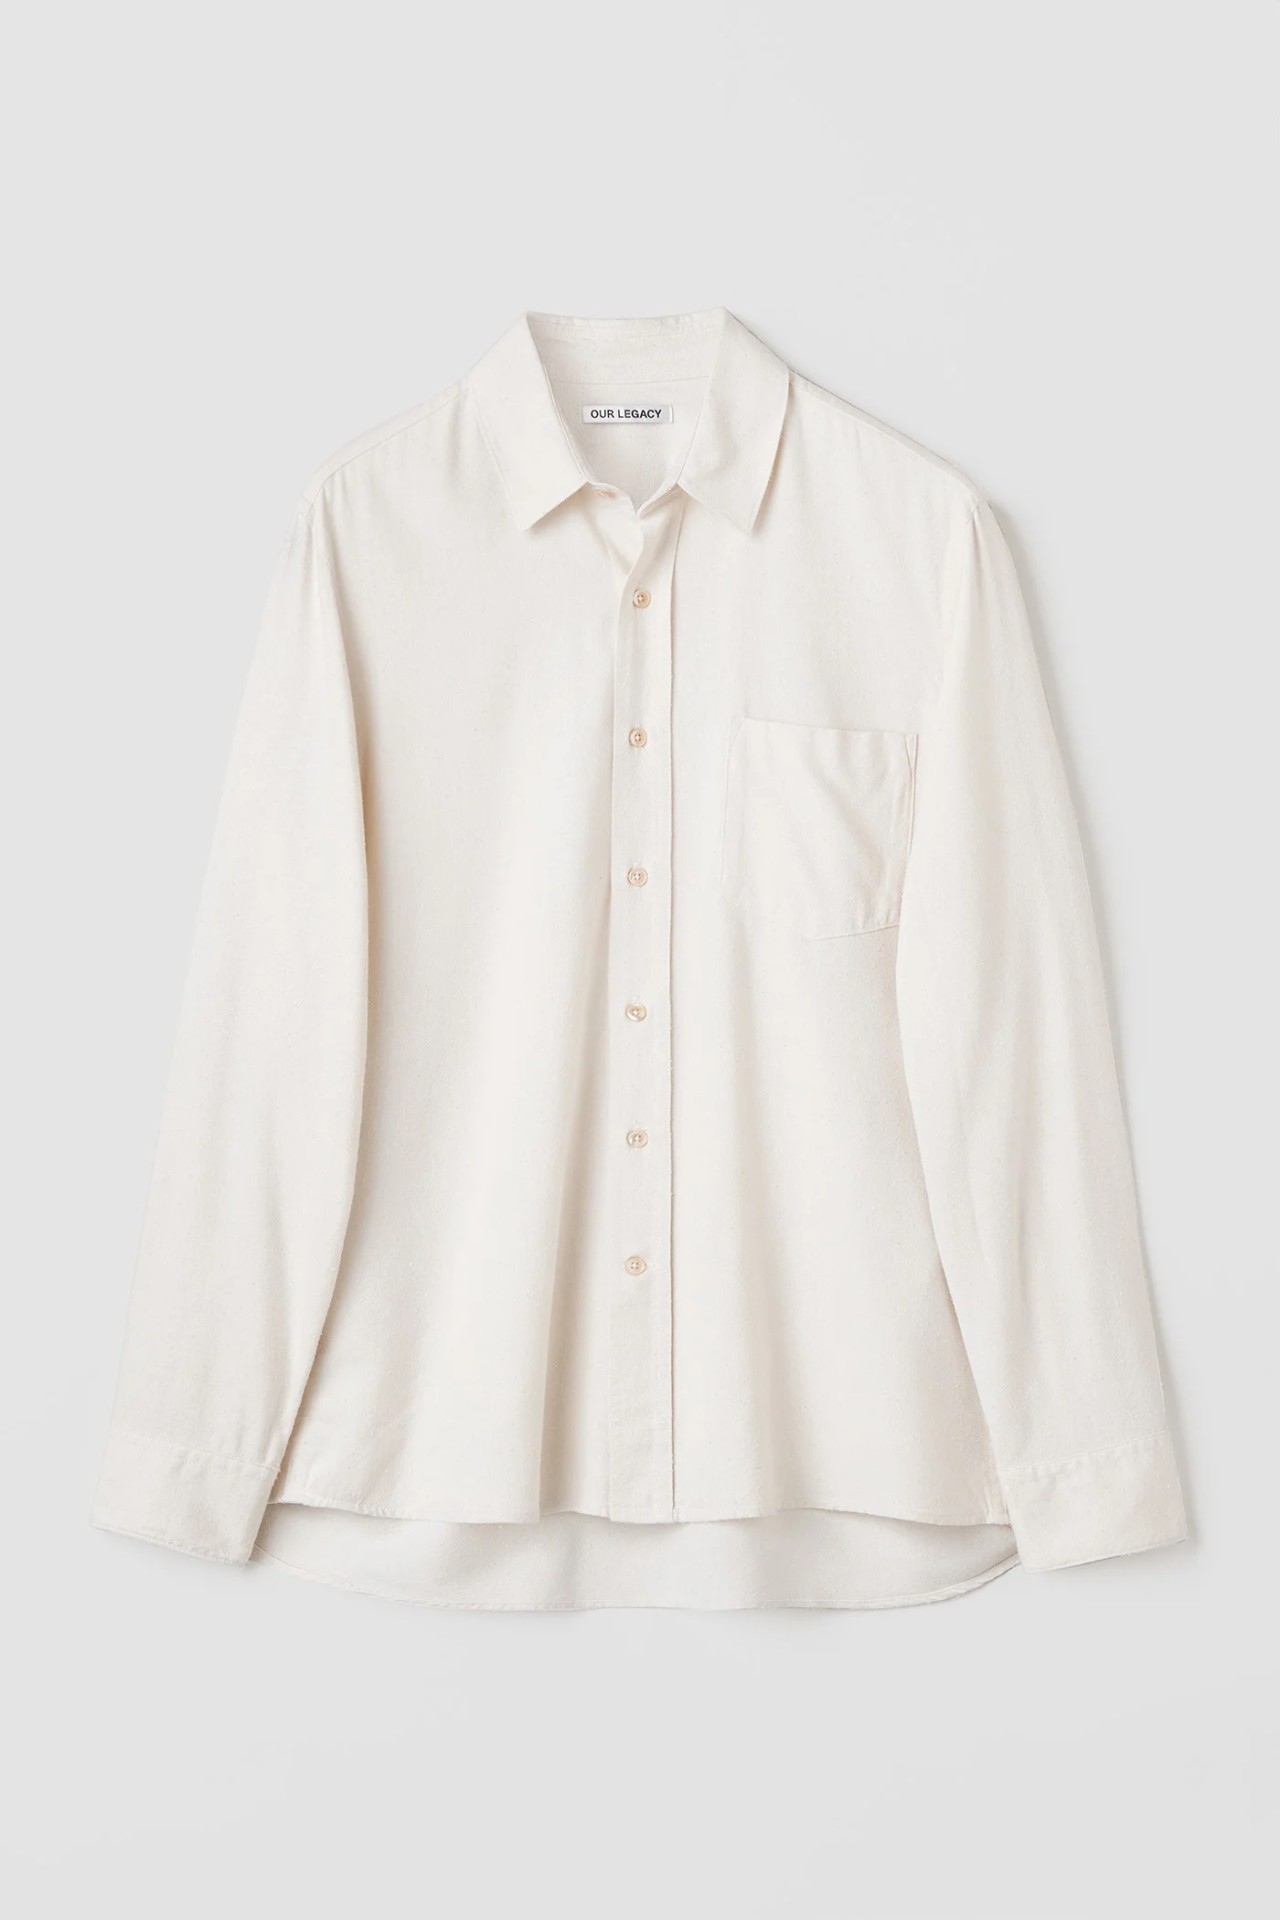 chemise blanche our legacy white raw silk